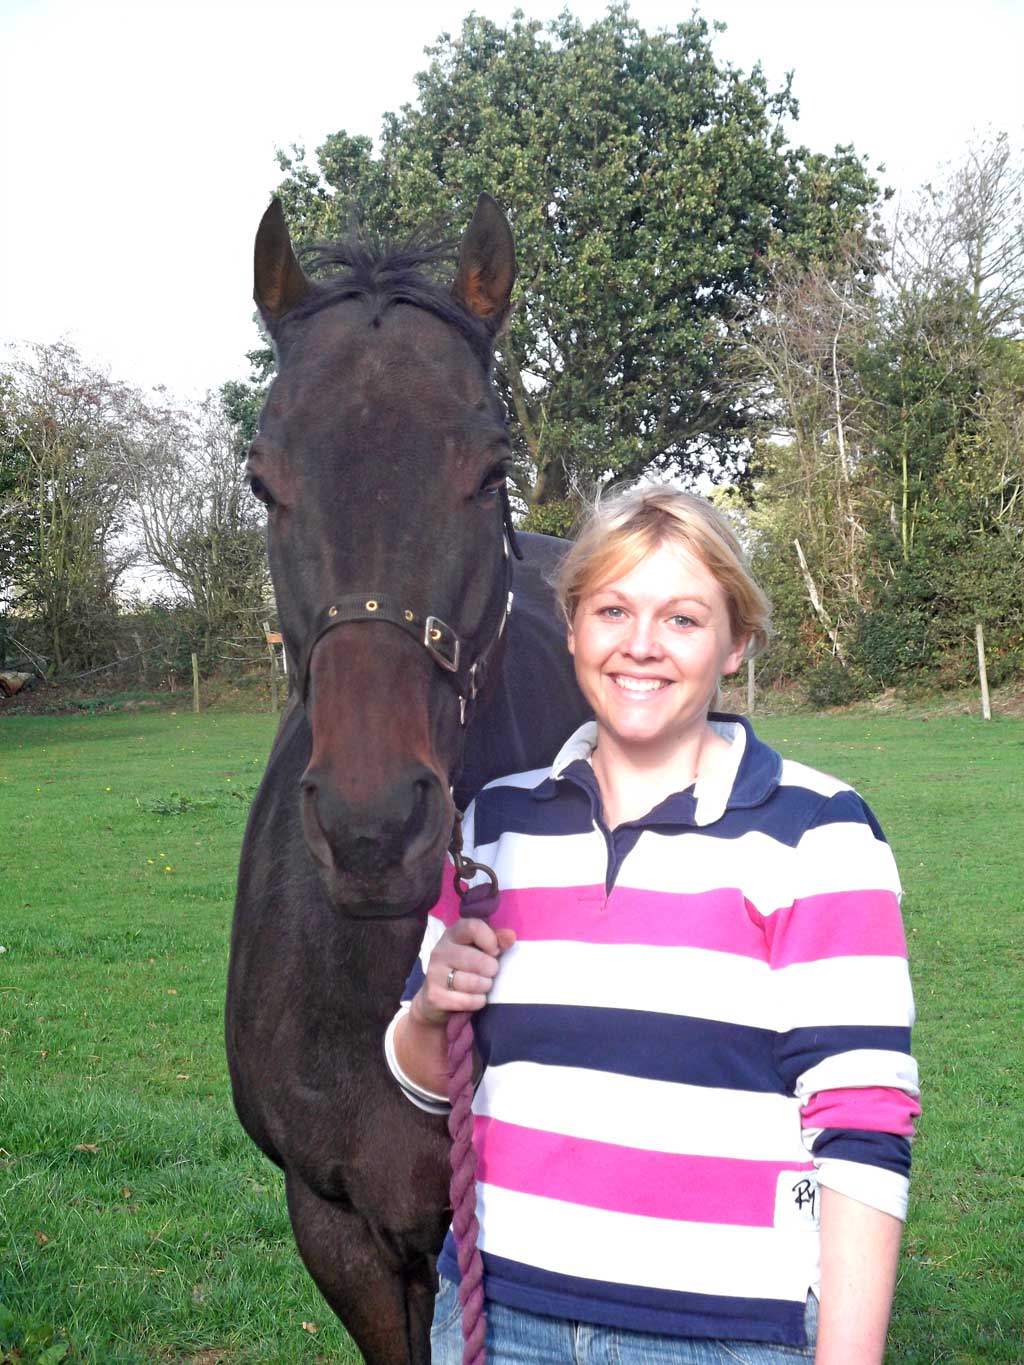 Laura Bradbeer with former racehorse Boo who benefitted from Equine Therapy